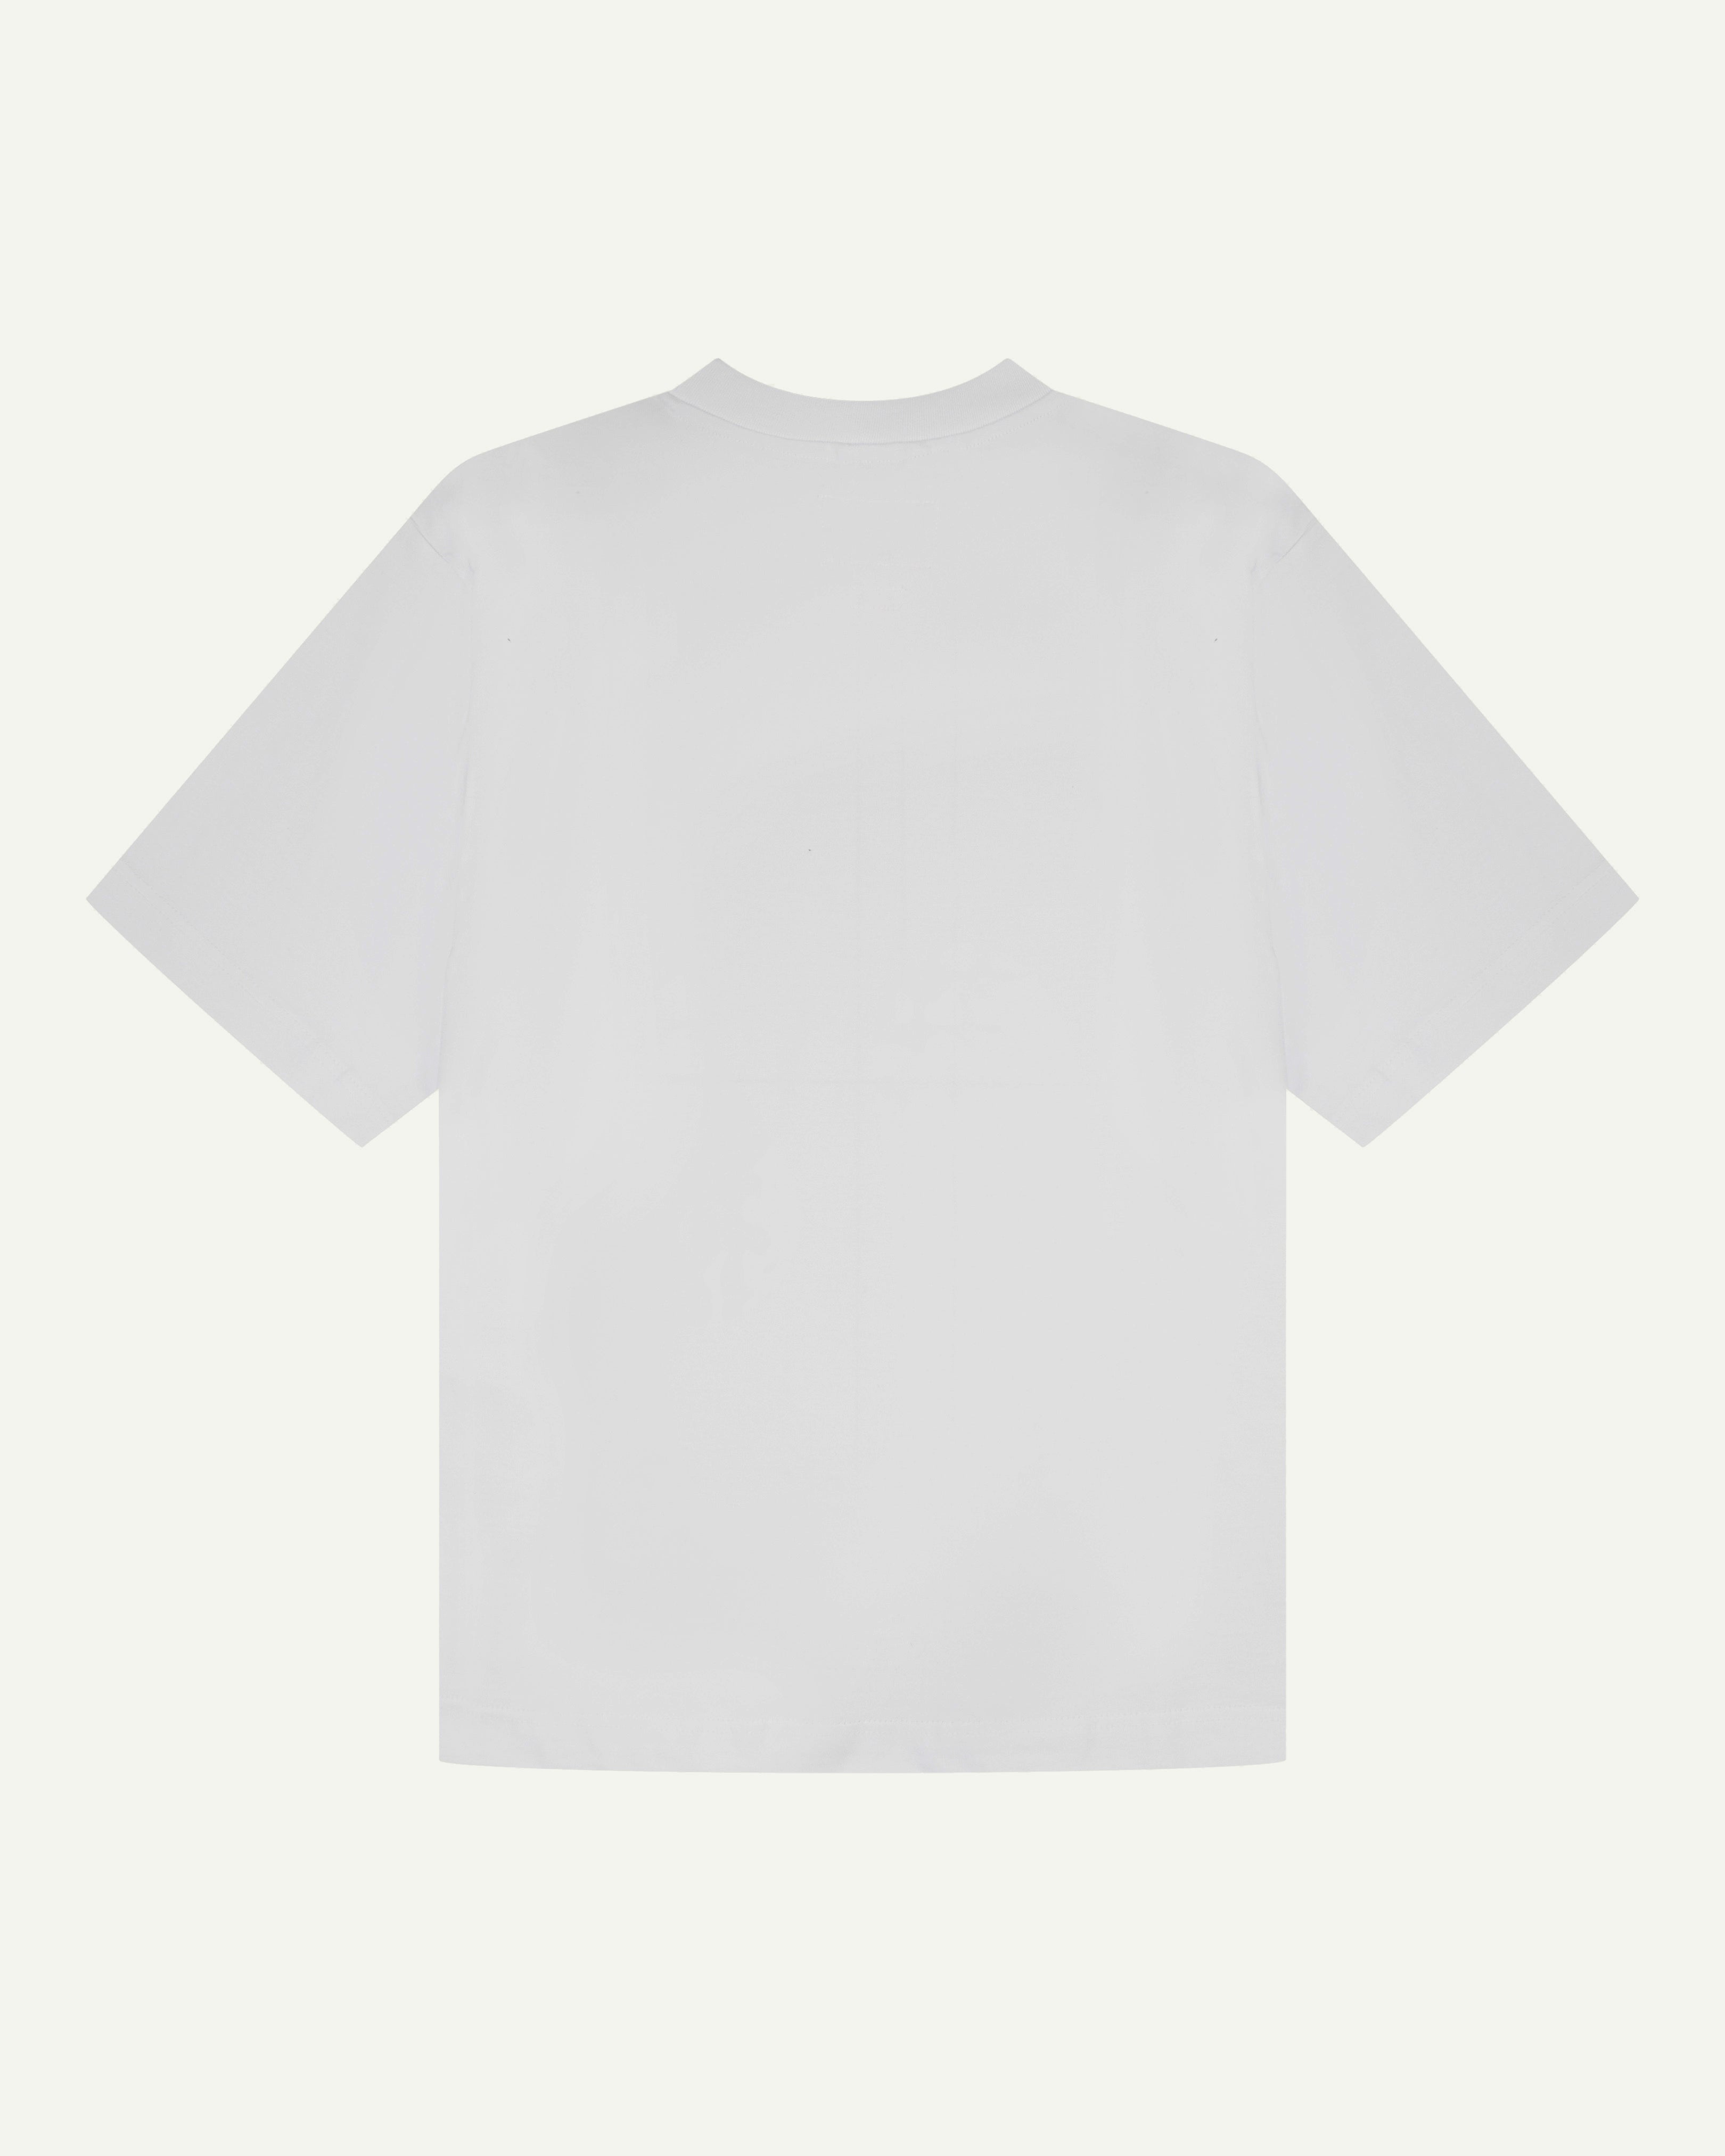 Back view of men's white oversized organic cotton T-shirt by Uskees